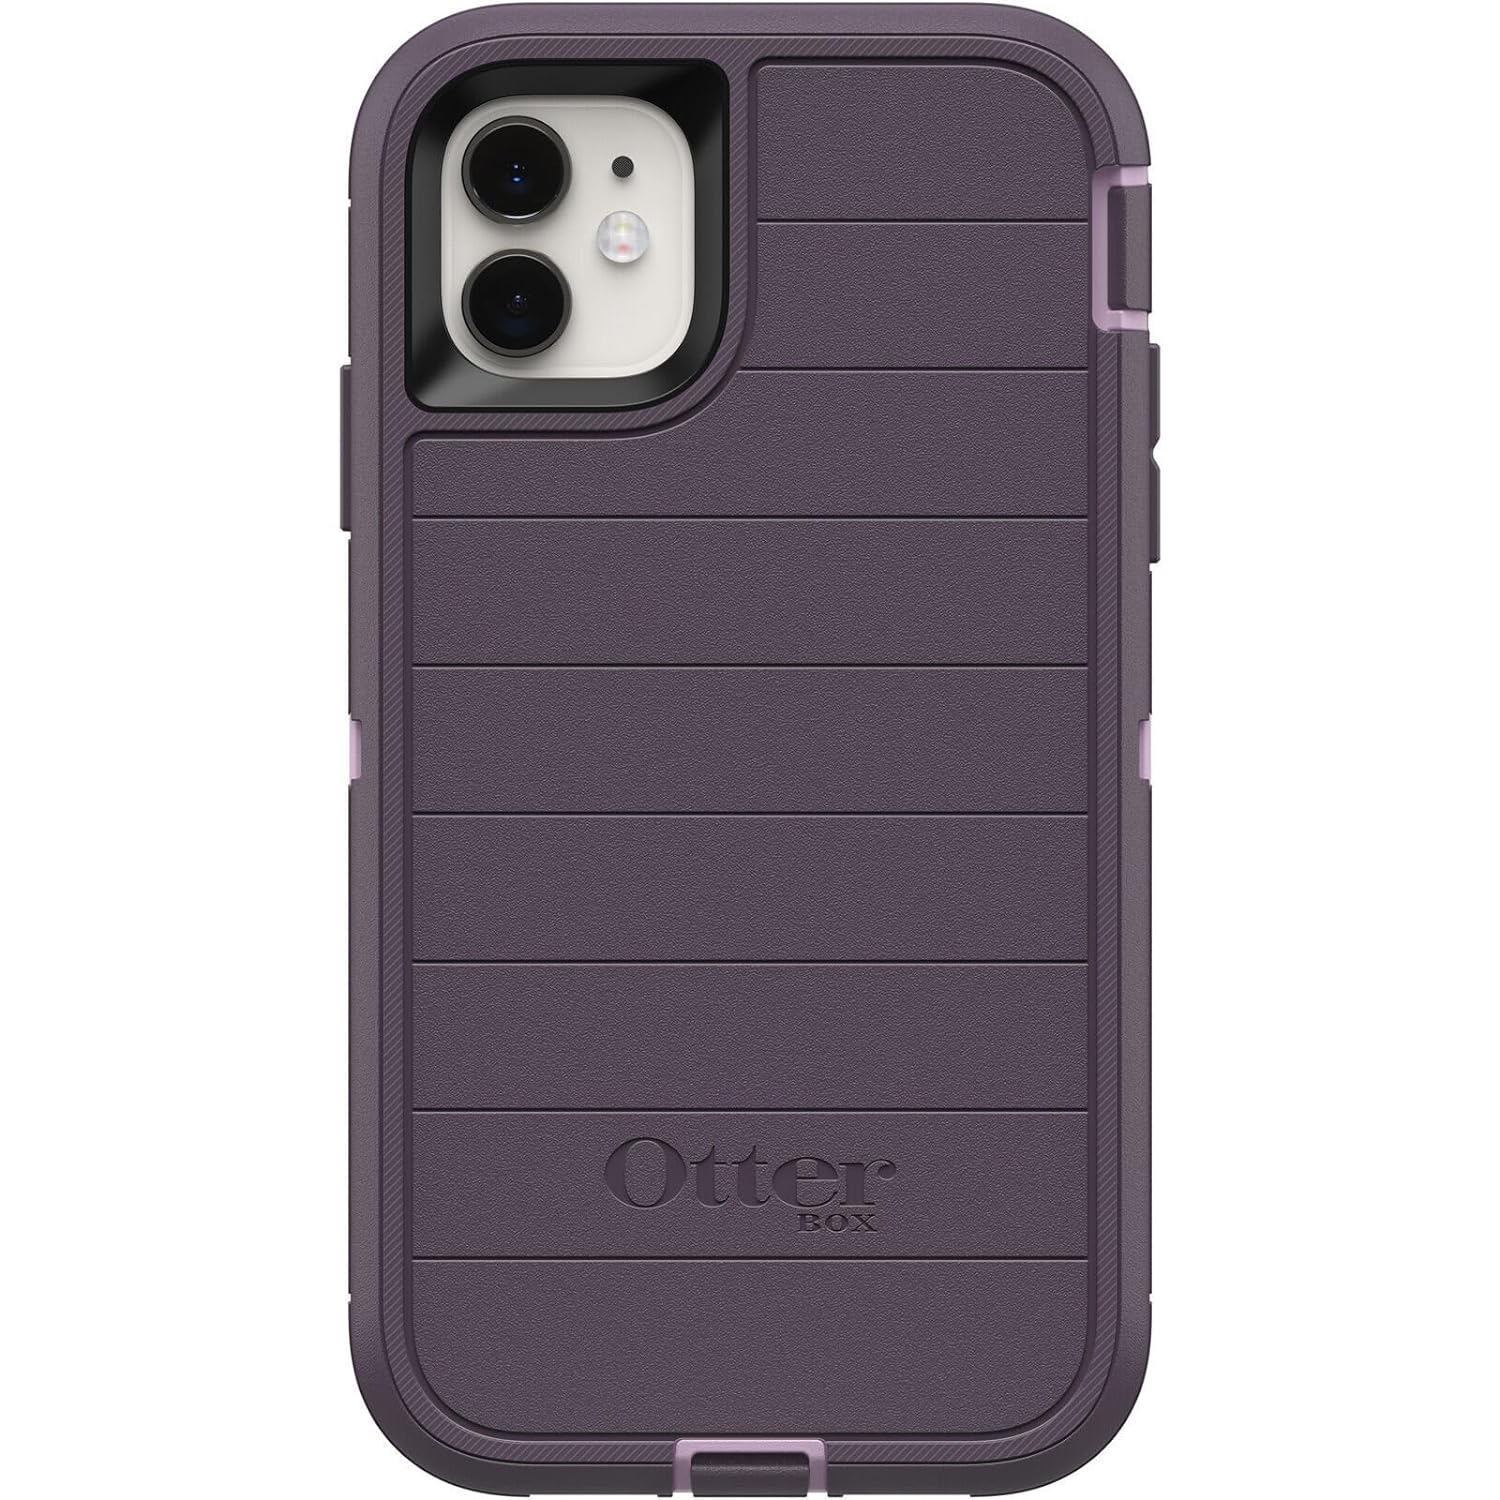 OtterBox Defender Series iPhone 11 Case - Non-Retail Packaging - Purple Nebula, Apple Phonecase, Raised Screen Bumper, Rotating Belt-Clip Holster/Kickstand, Port Covers